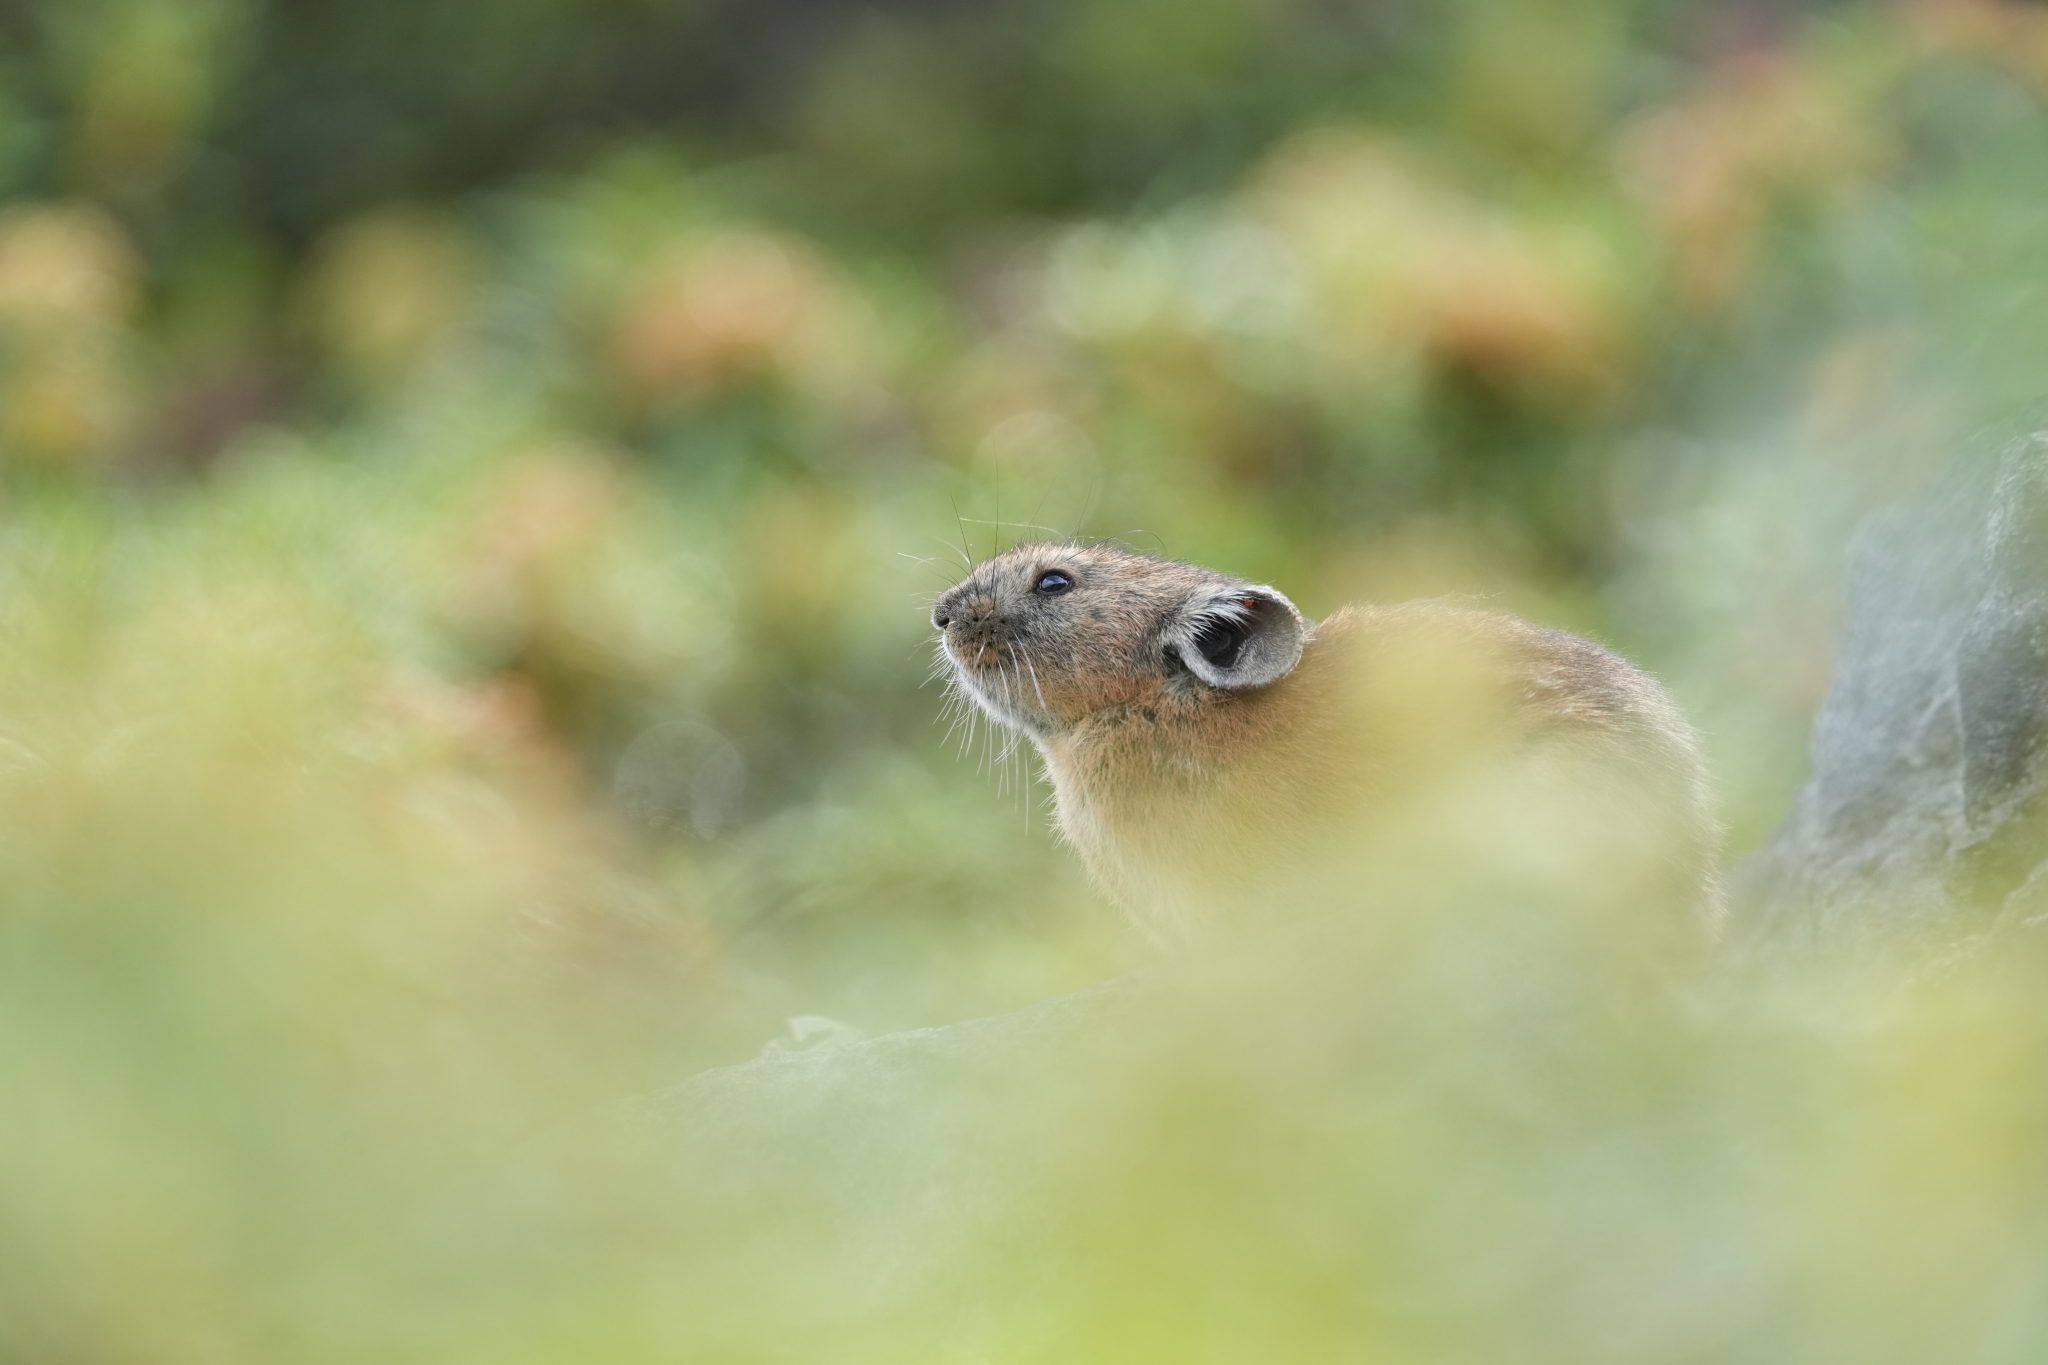 Hare among grasses in deep bokeh foreground and background